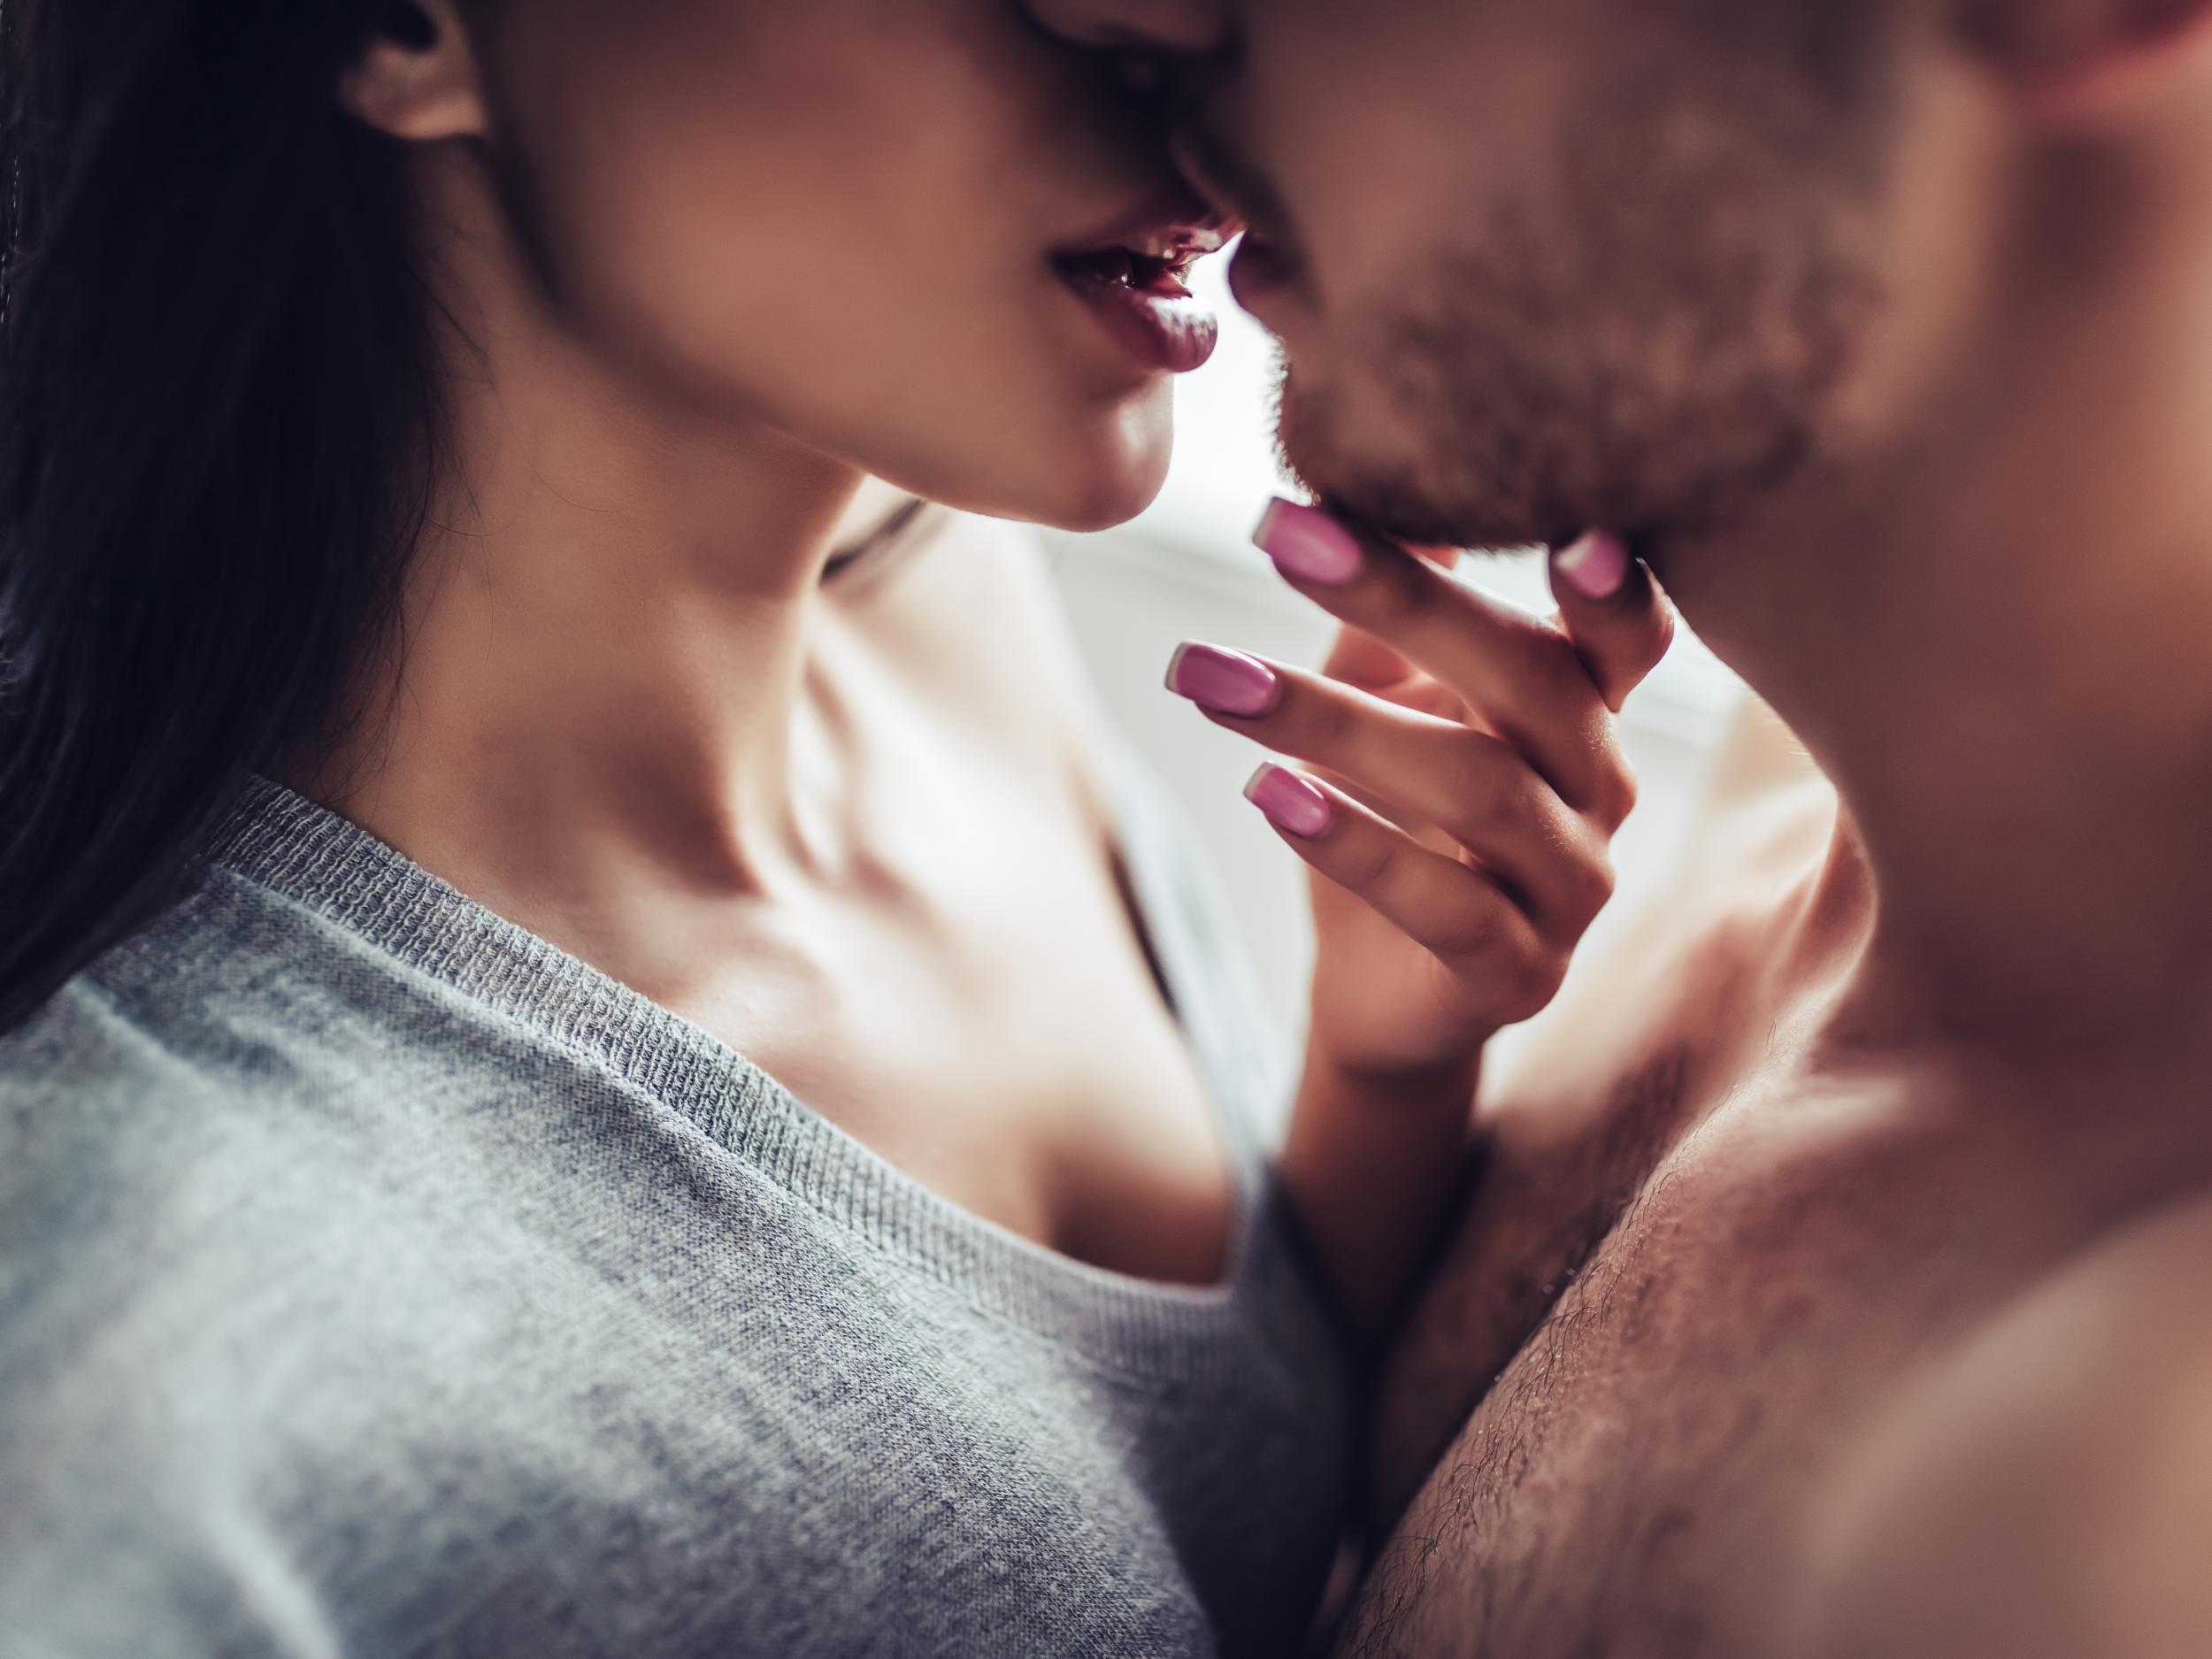 Physical intimacy releases the feel good neurochemical dopamine, which also occurs when partaking in other rewarding activities such as eating and even gambling